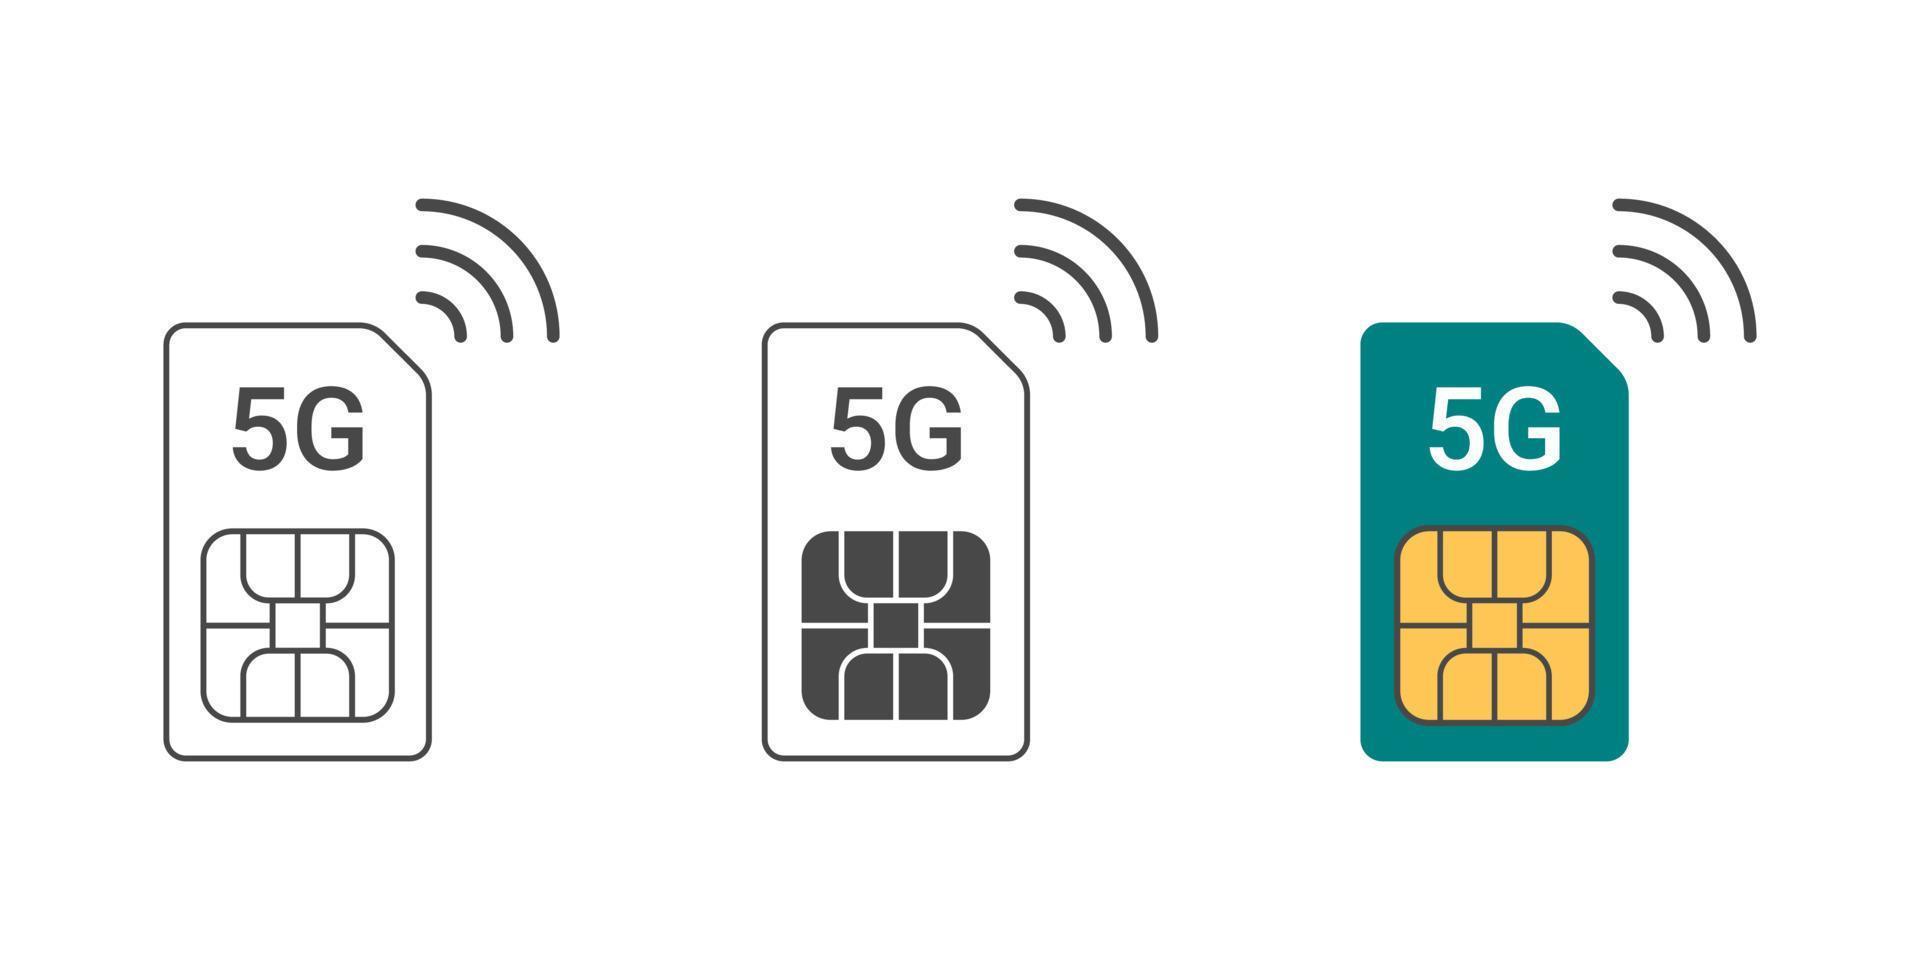 SIM card communication 5G. SIM card icons for a mobile phone. Vector illustration